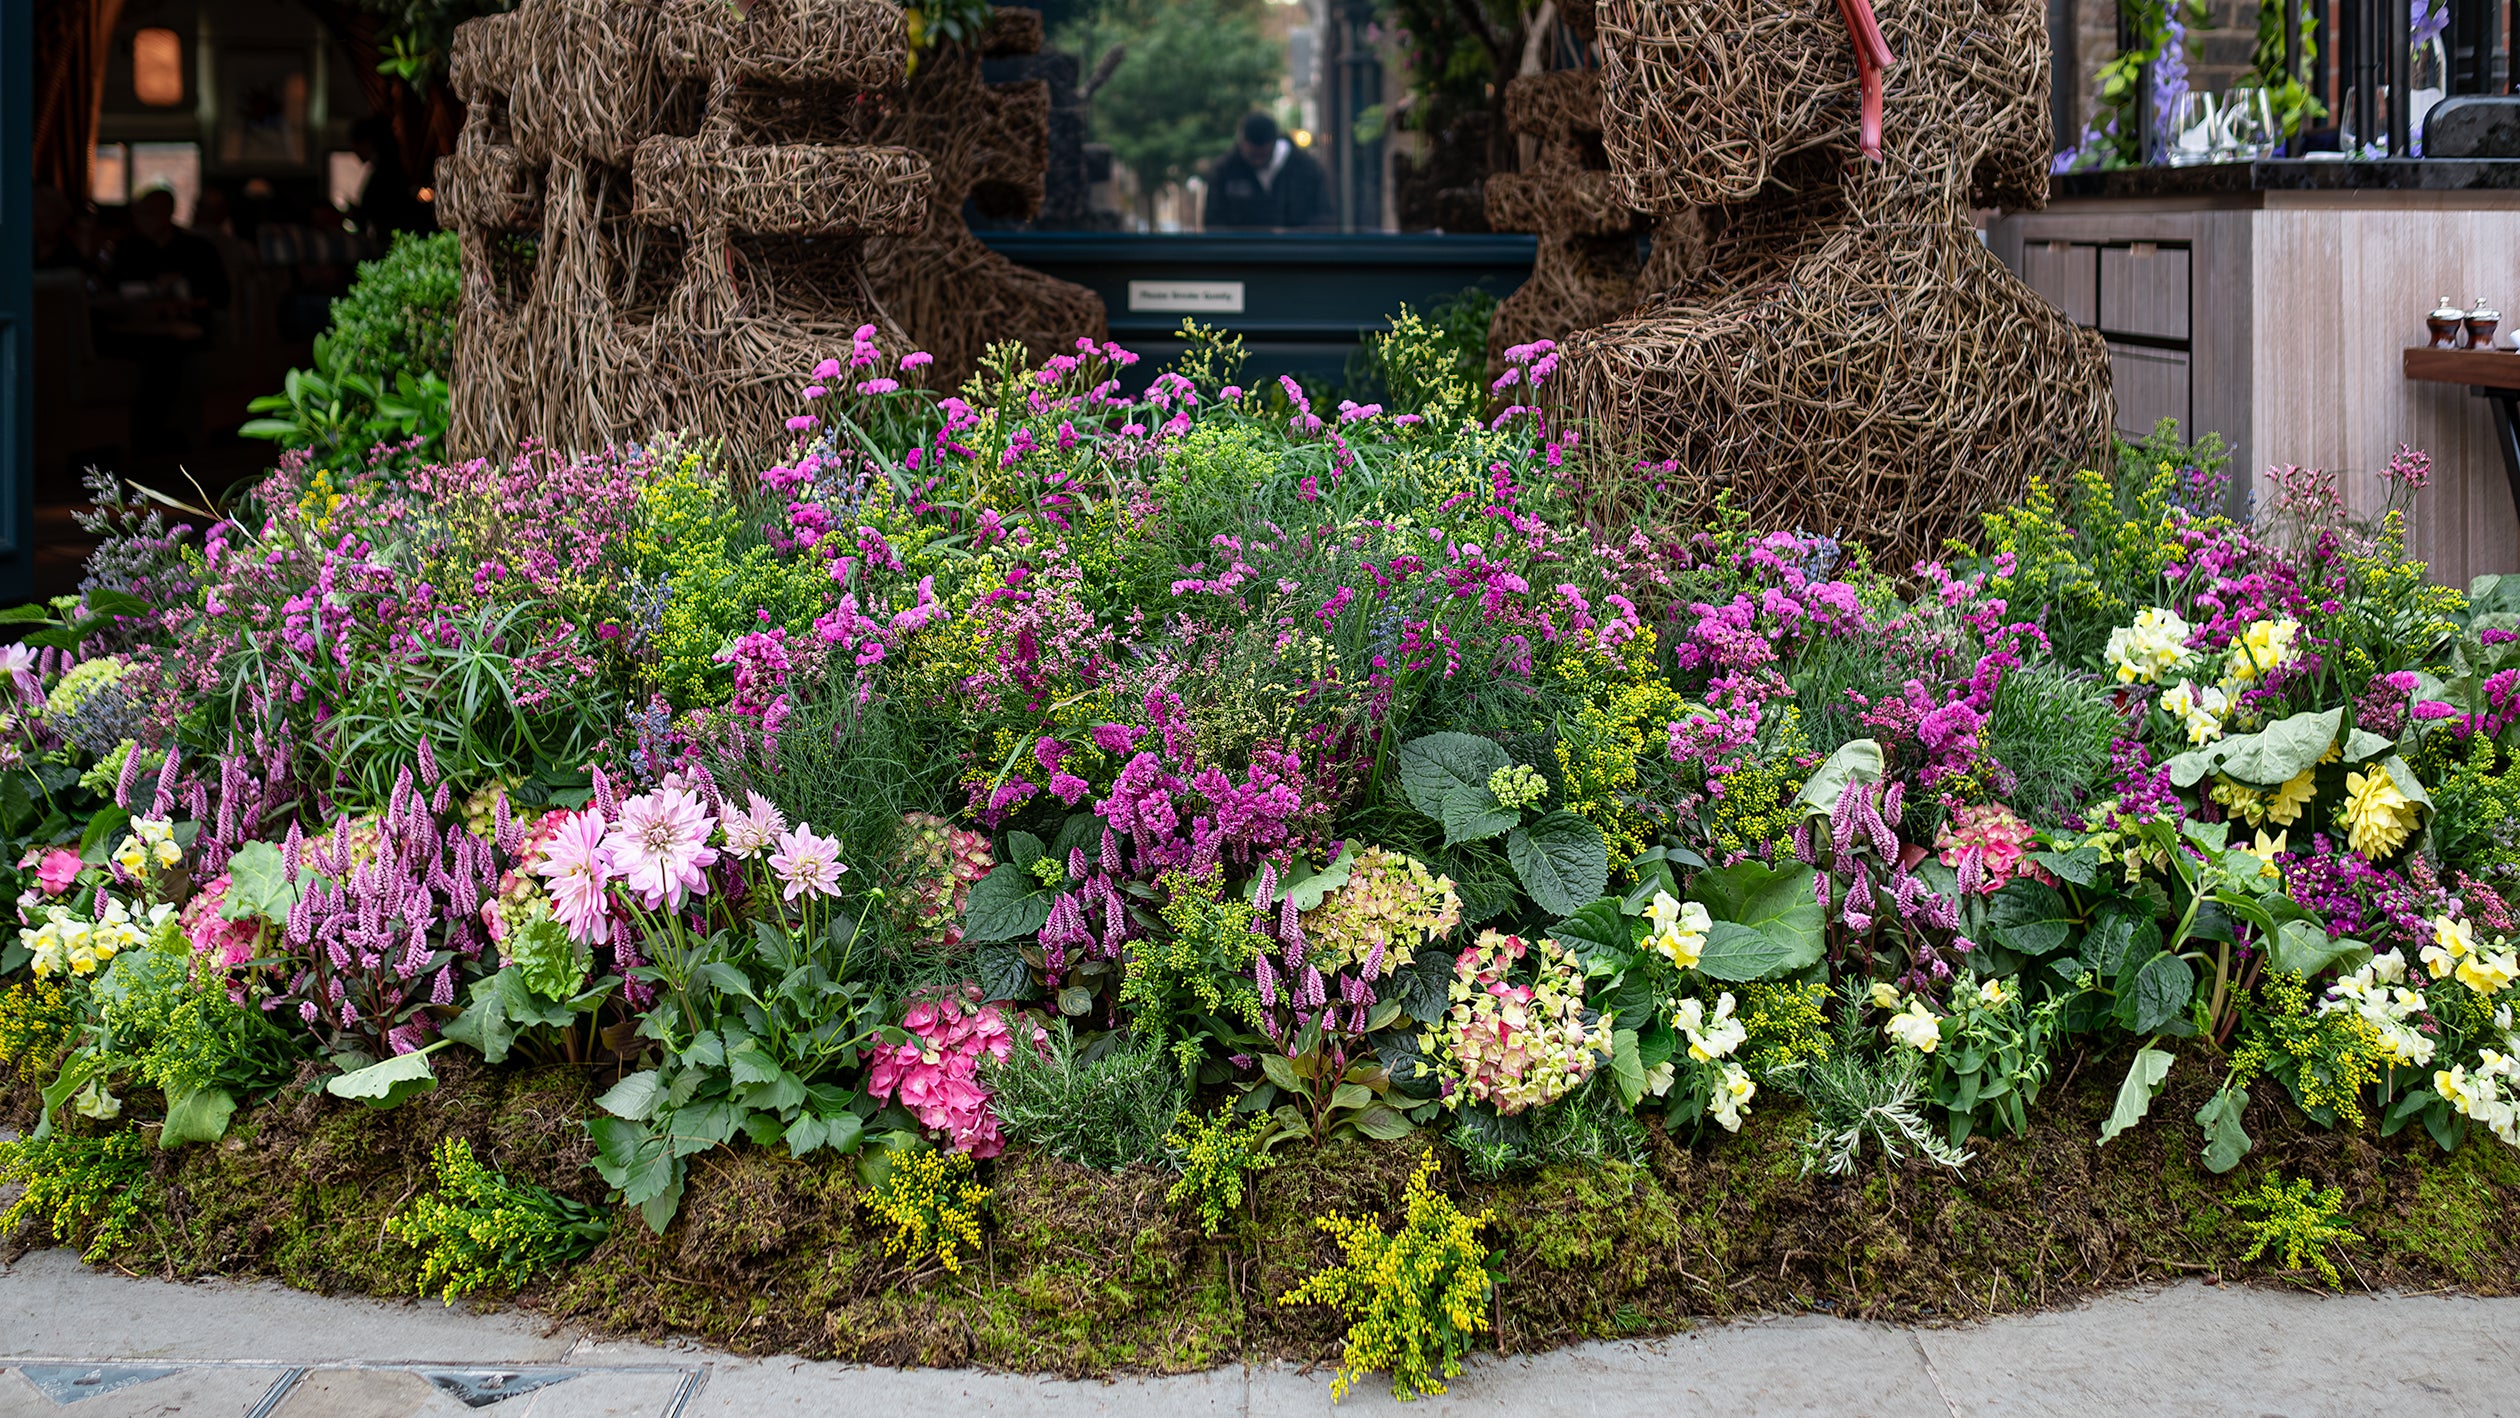 Close-up of a bespoke garden bed display at Chelsea in Bloom designed, created and installed by event florist Amaranté London, showcasing a variety of colourful flowers including pink dahlias, yellow chrysanthemums, and green hydrangeas.